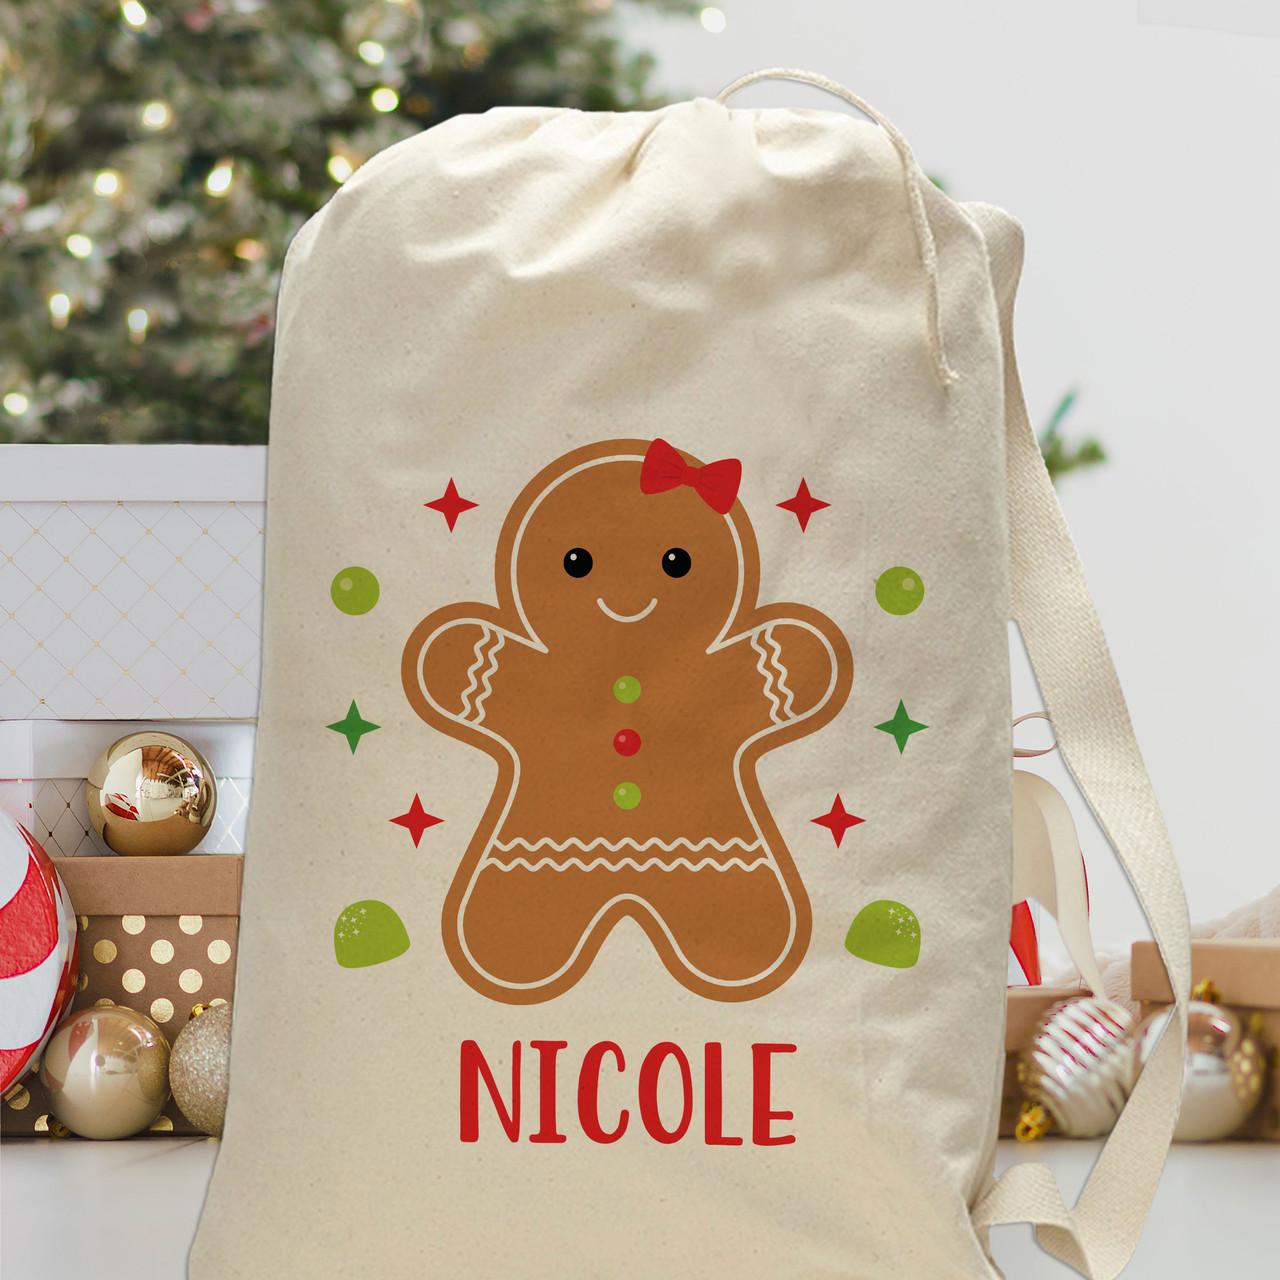 https://cdn11.bigcommerce.com/s-5grzuu6/images/stencil/1280x1280/products/6396/51328/Gingerbread-Girl-Personalized-Large-Christmas_Santa_Sack_Gift_Bag__69976.1668445160.jpg?c=2